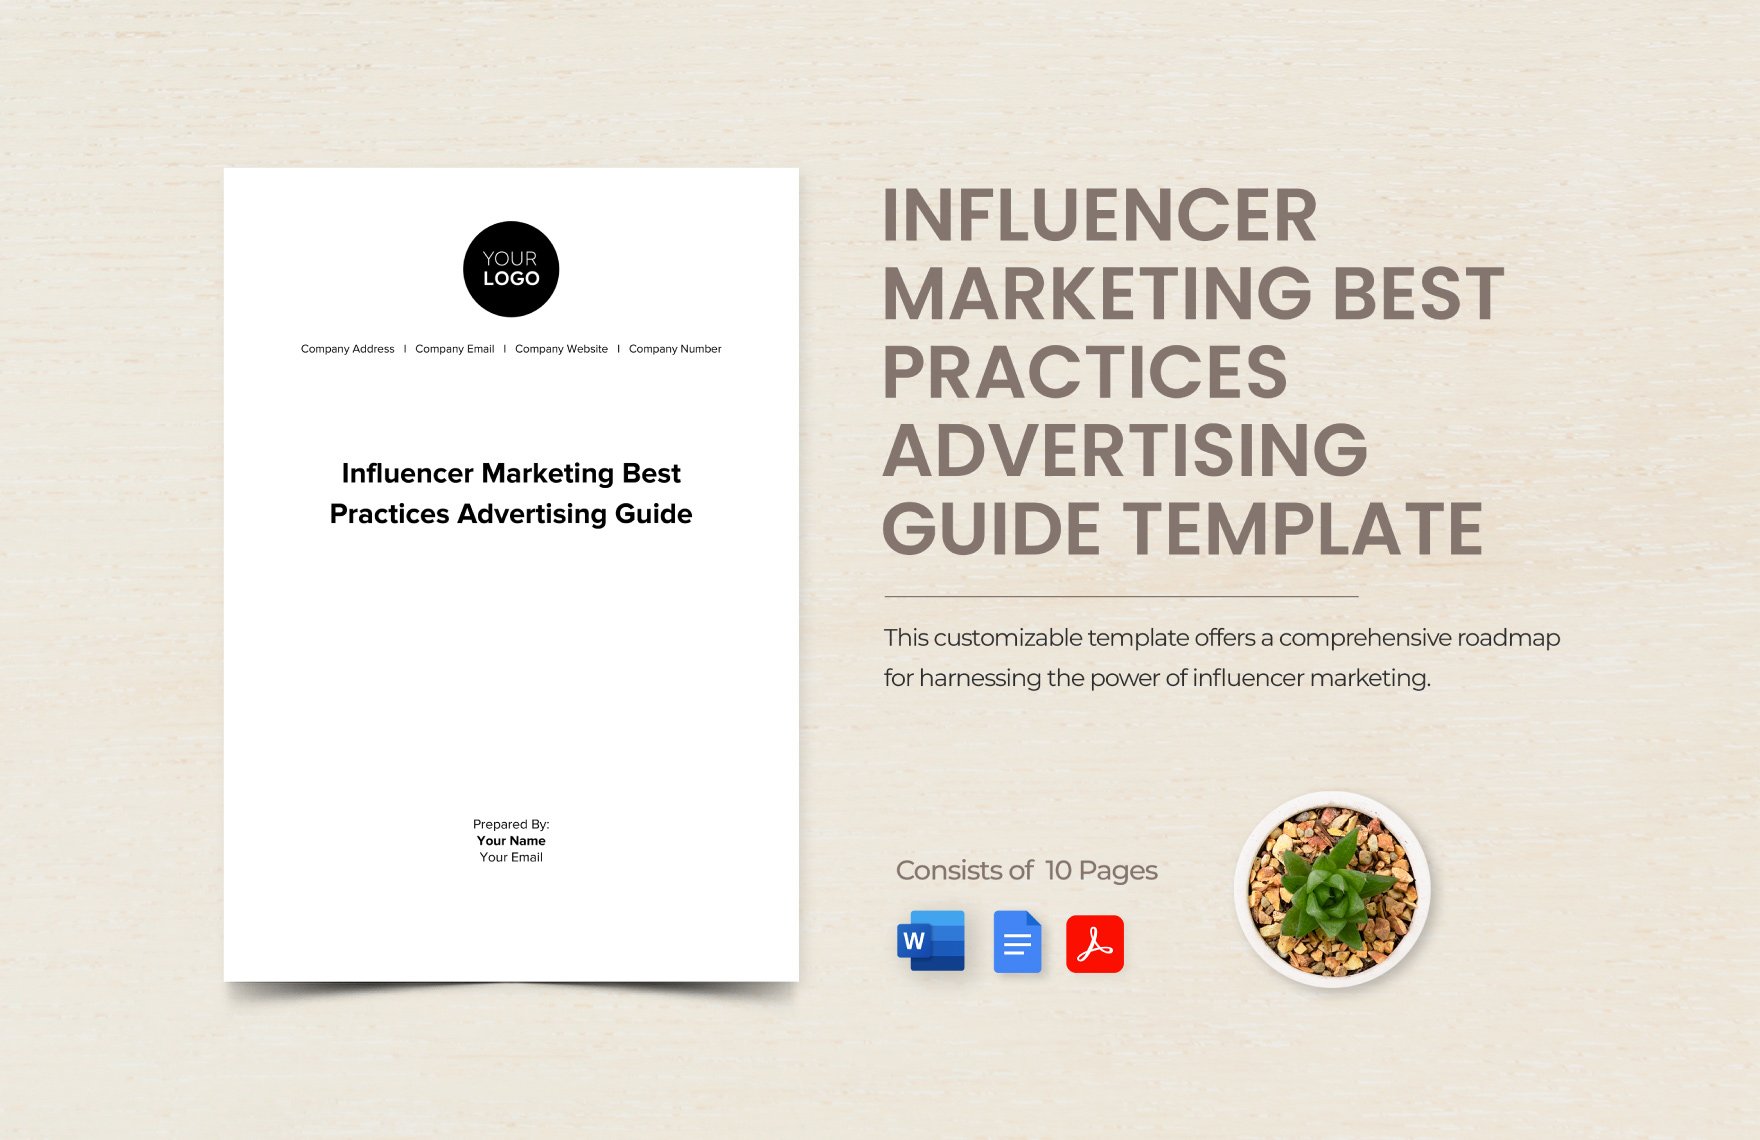 Influencer Marketing Best Practices Advertising Guide Template in Word, Google Docs, PDF